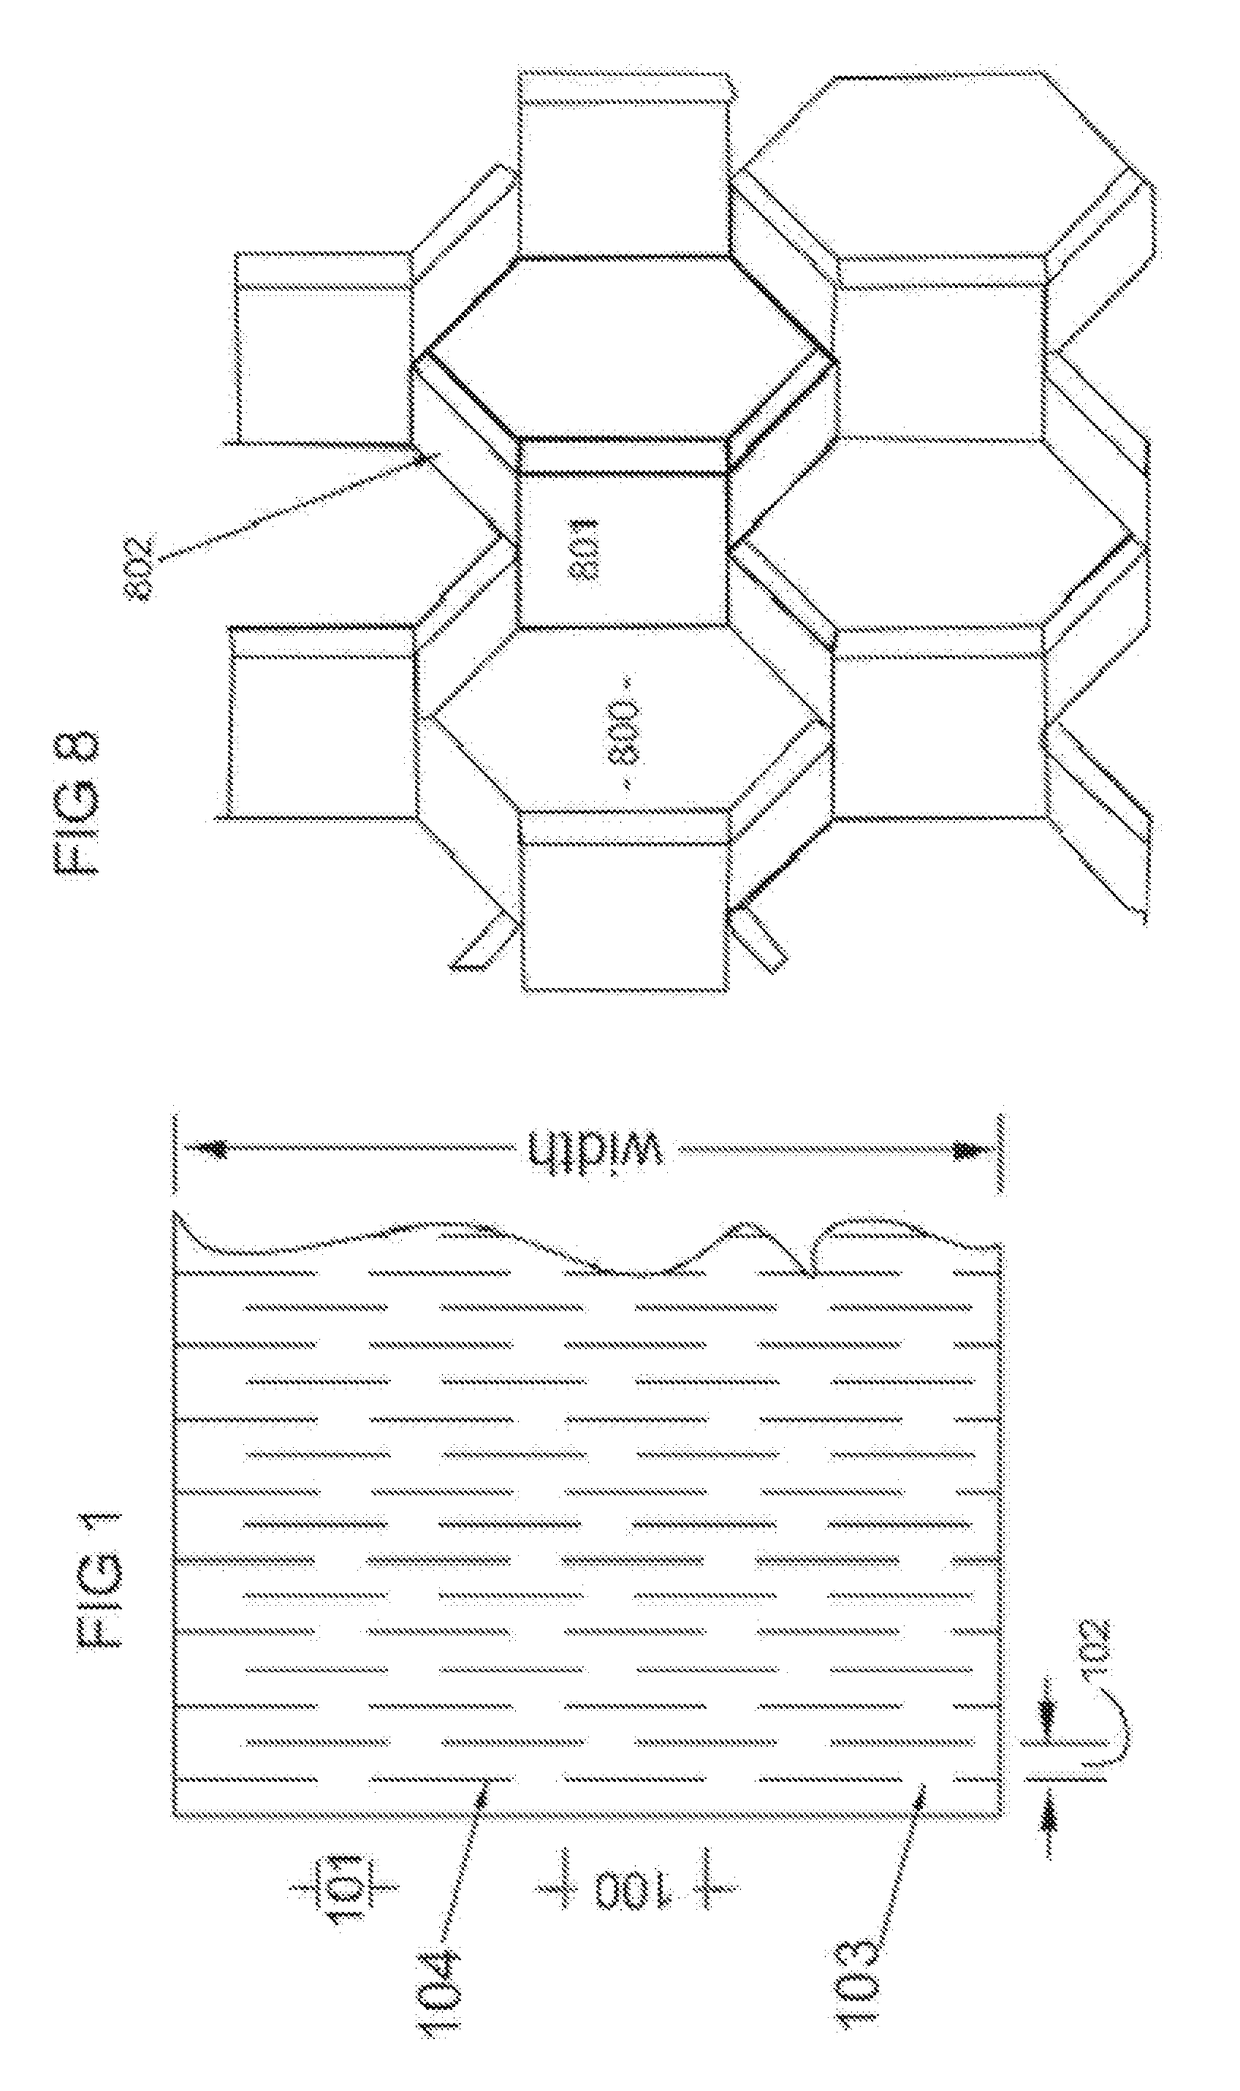 Expansion Apparatus and Method for Producing Interlocking Expanded Slit Sheet Packaging Material